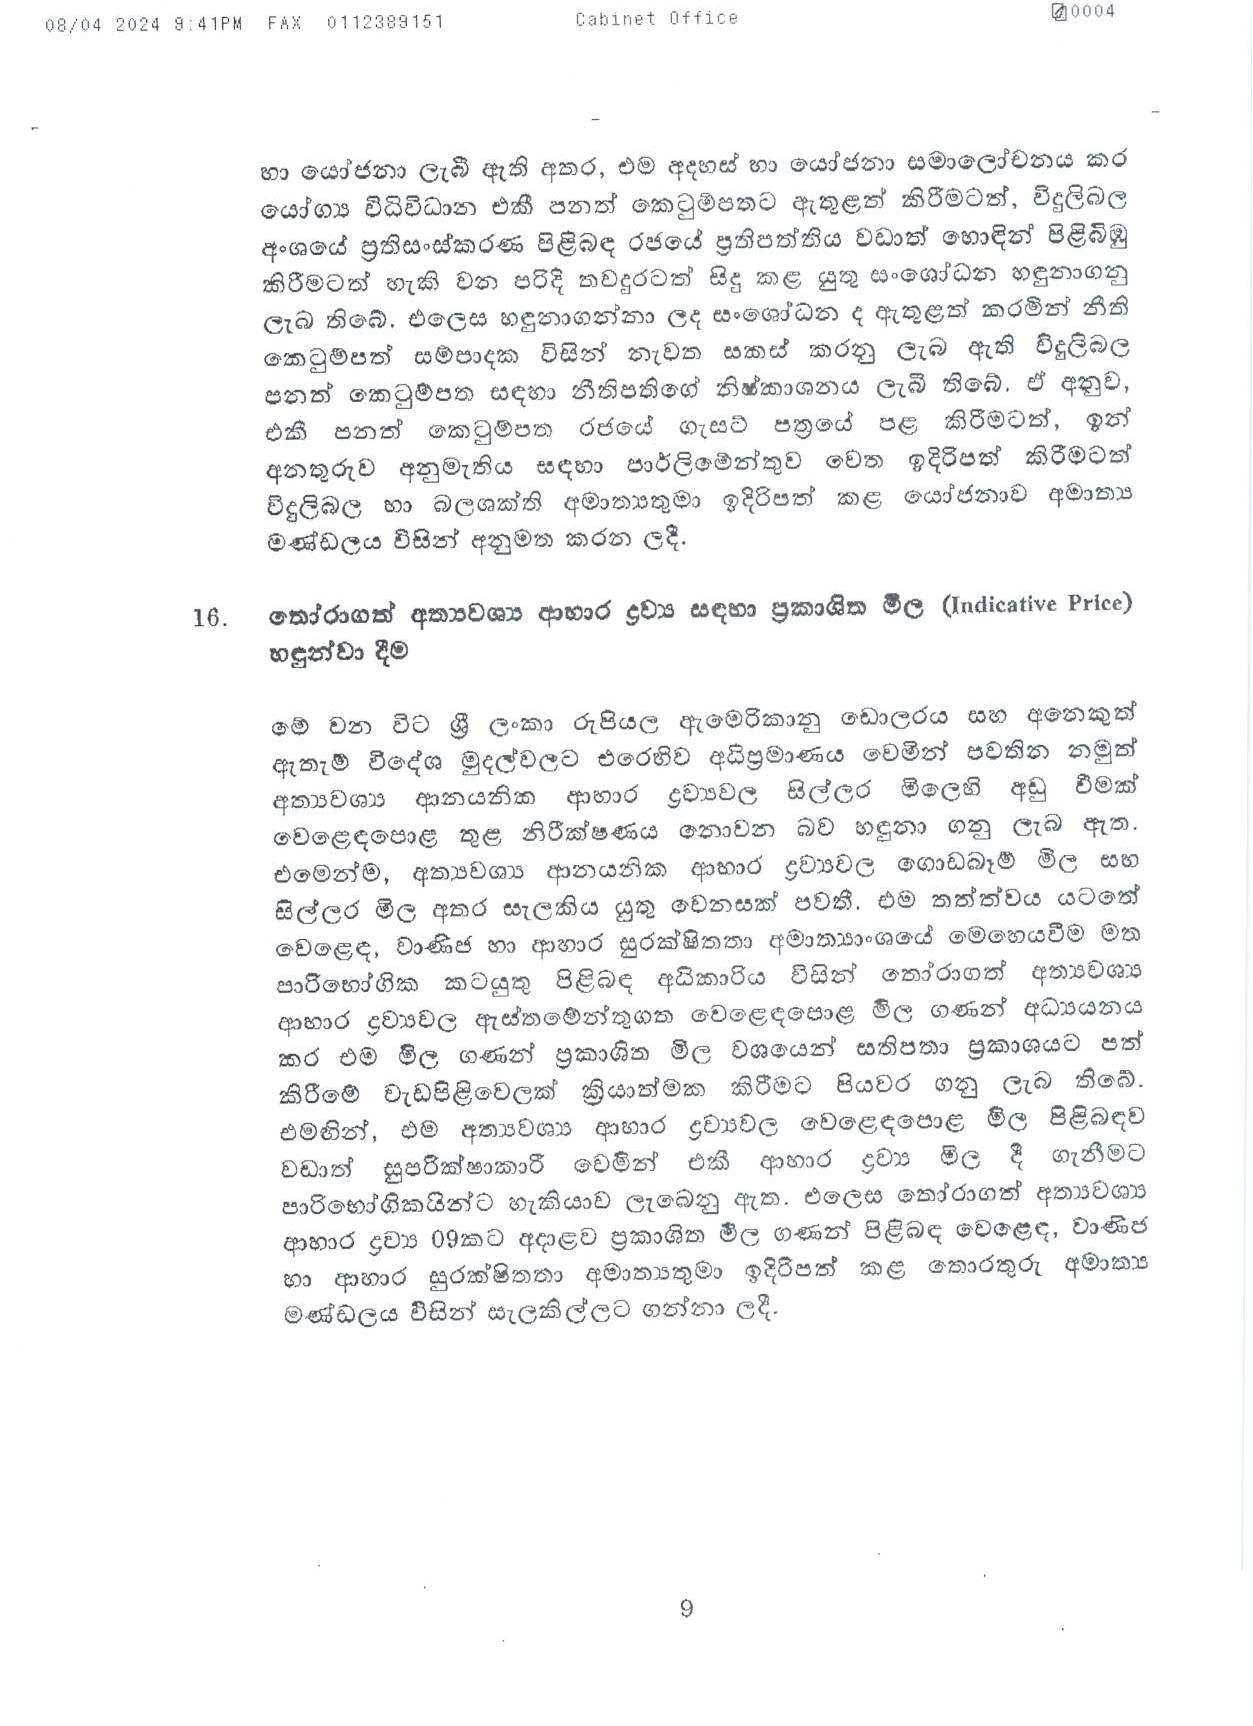 Cabinet Decision on 08.04.2024 page 009